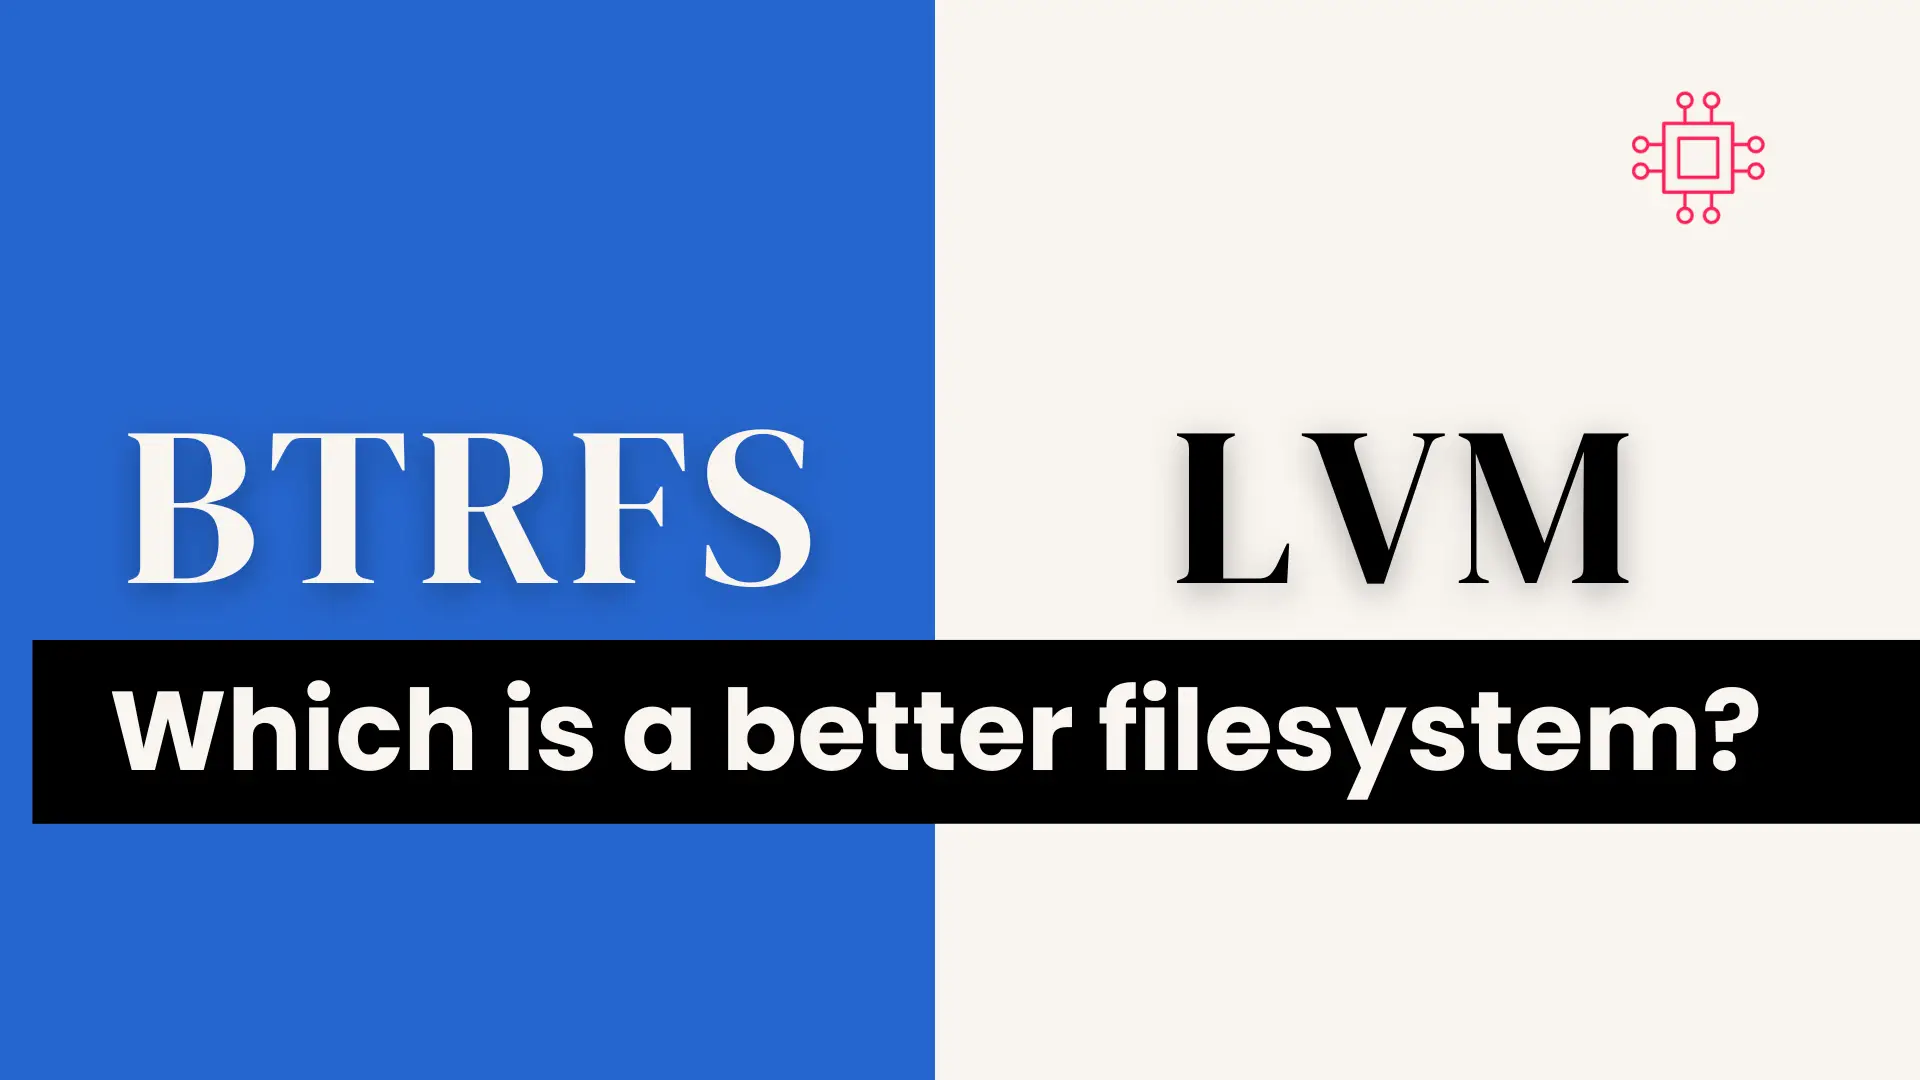 Btrfs or LVM: Which is a better filesystem?